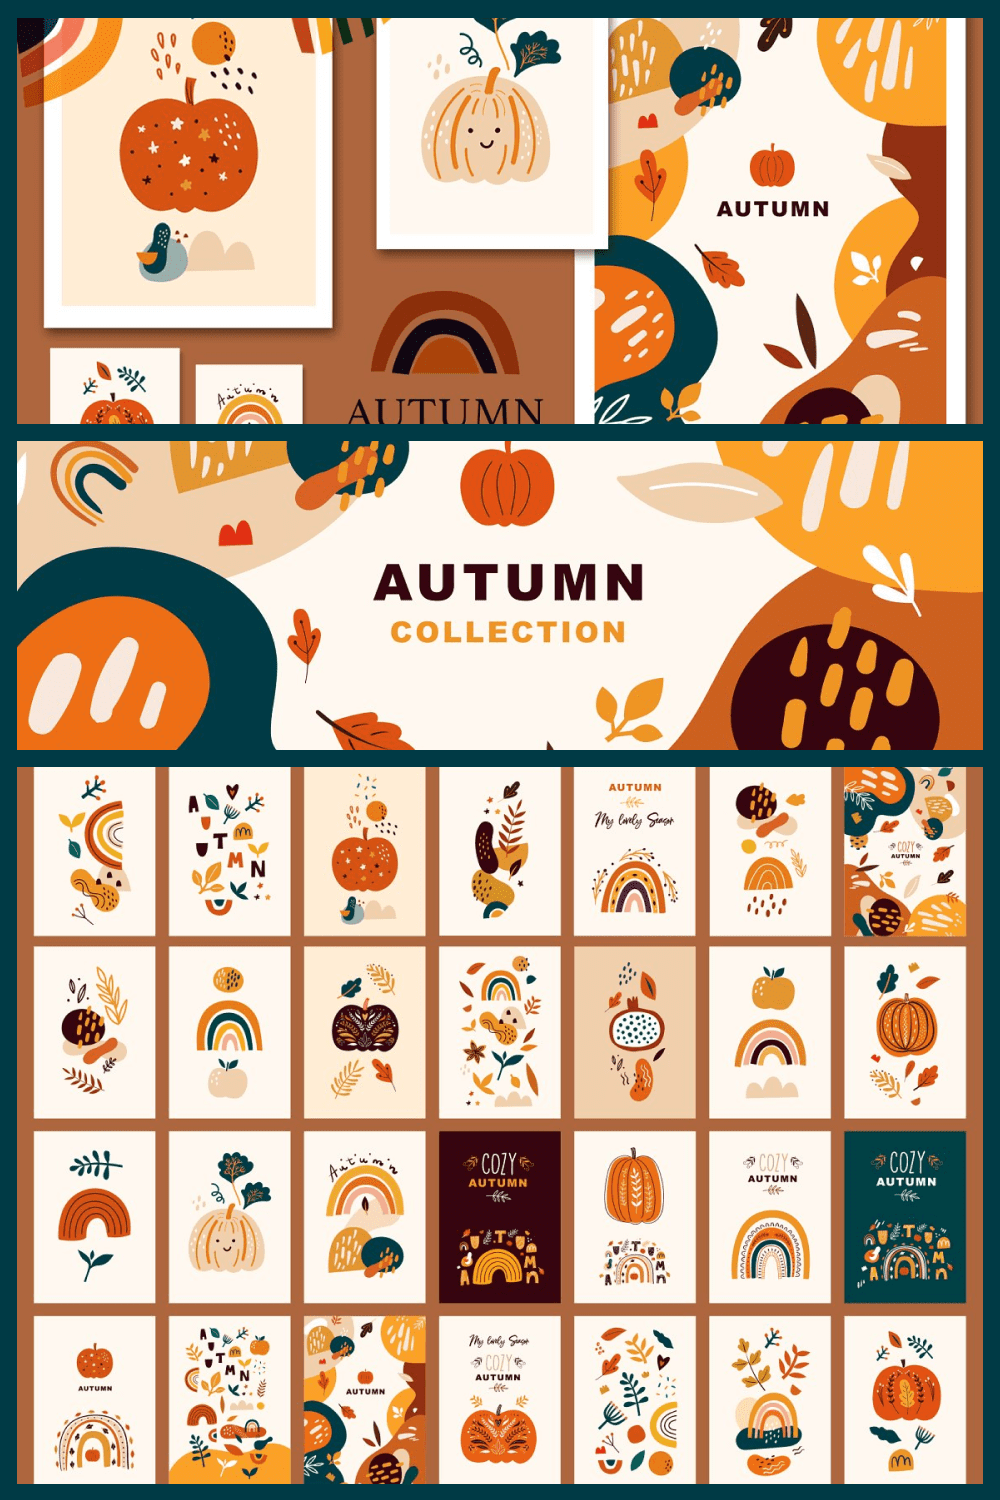 Stylish illustrations in autumn colors with Halloween elements.